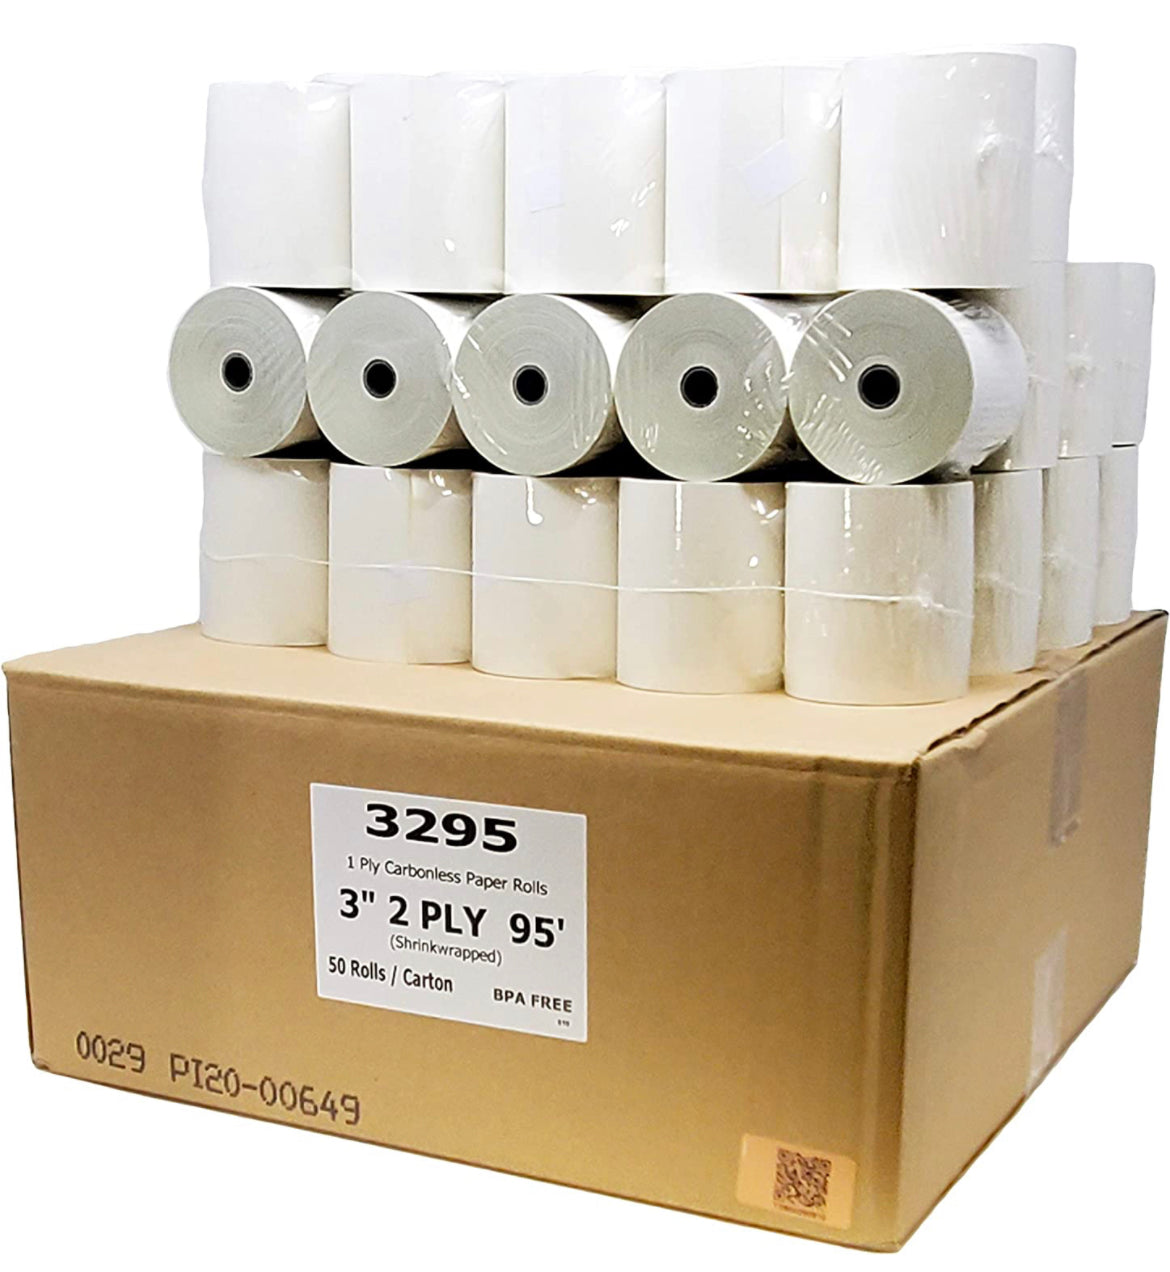 3" x 90' 2-Ply Carbonless Receipt Paper Rolls - White/Canary (50 Rolls)